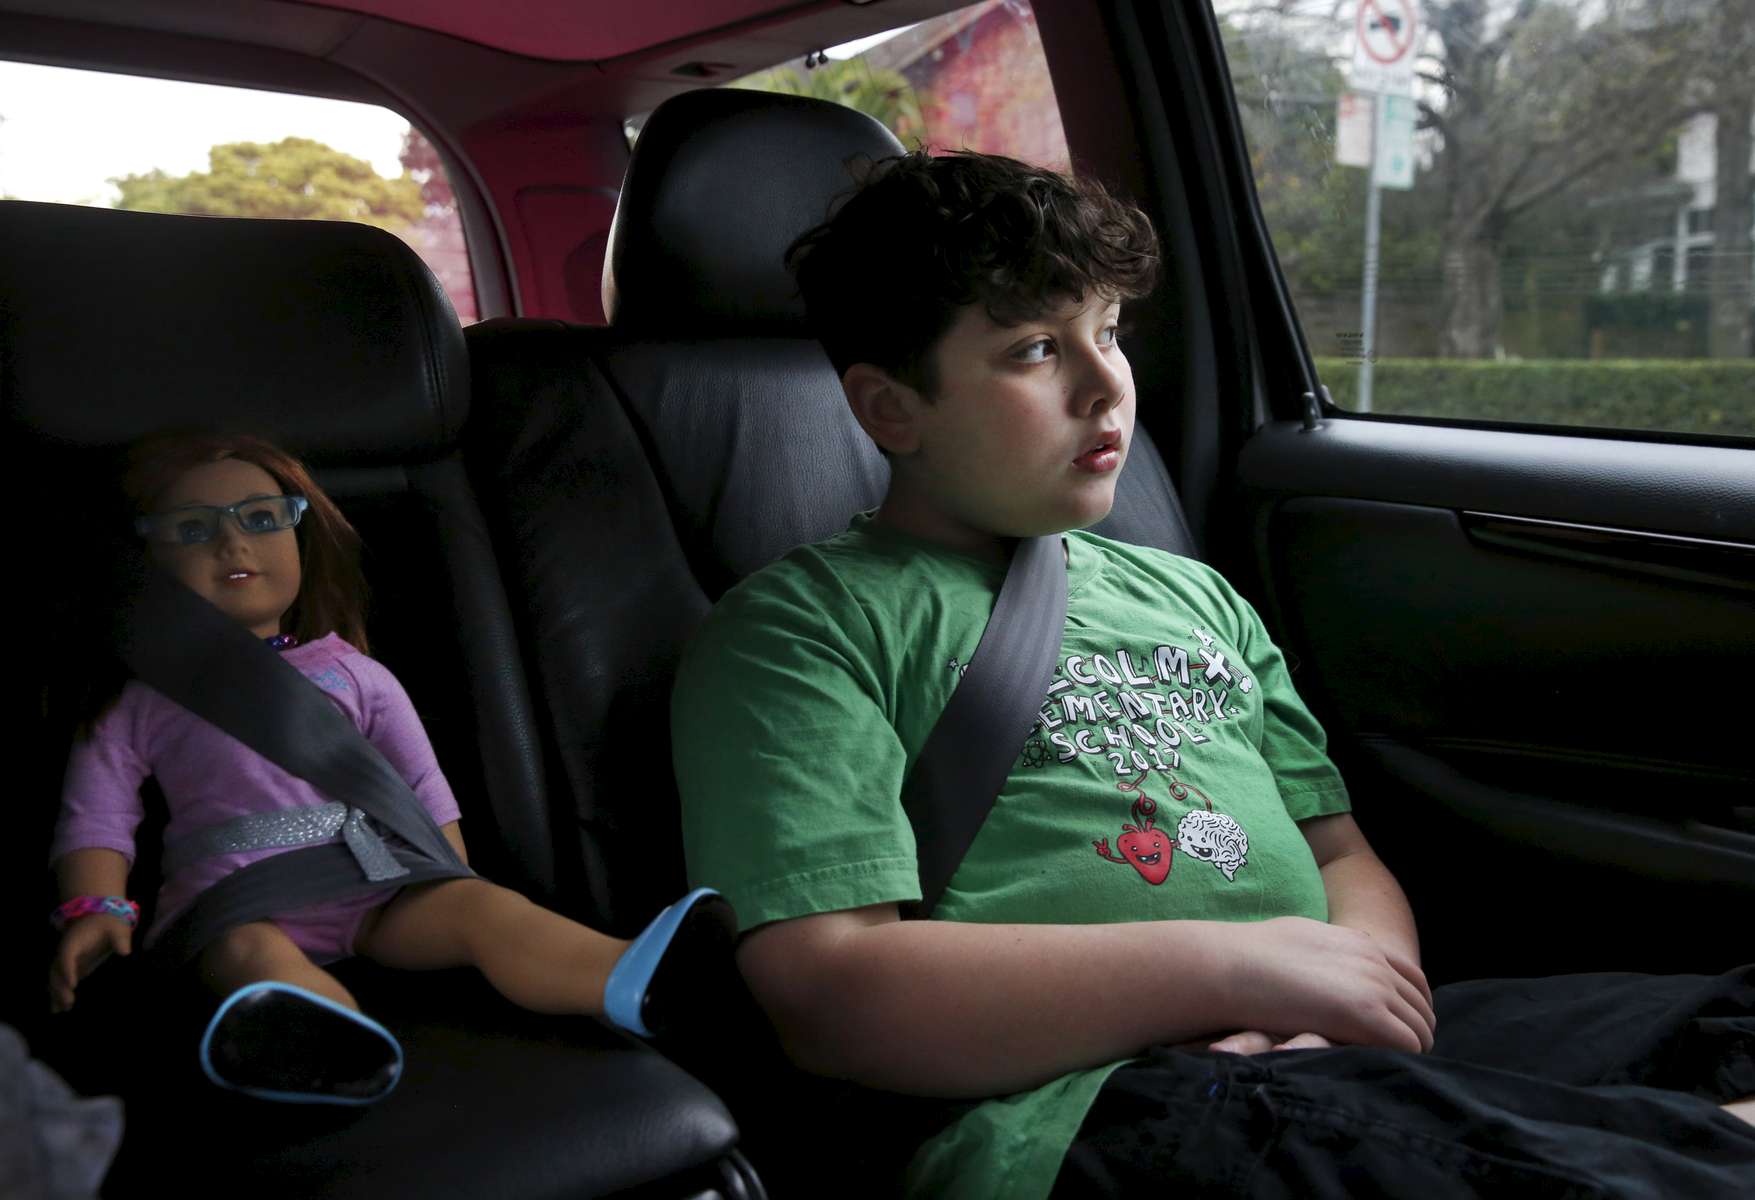 James Kaplan, 9, rides in the car with Brooks buckled in securely next to him with his younger sibling and mother on their way to host a rally for Gavin Grimm Feb. 15, 2017 in Berkeley, Calif. Grimm, a transgender teenager, sued the school board of his Virginia high school for the right to use the bathroom that corresponds with his gender identity. Sara Kaplan organized a rally that was one of many coordinated across the nation in support of Grimm before his case was to be seen by the Supreme Court. Ben, James' father, says that right after he transitioned, James stopped playing with his beloved dolls. It was not until his parents told him that just because he was a boy didn't mean he couldn't play with his dolls that he picked them back up again.